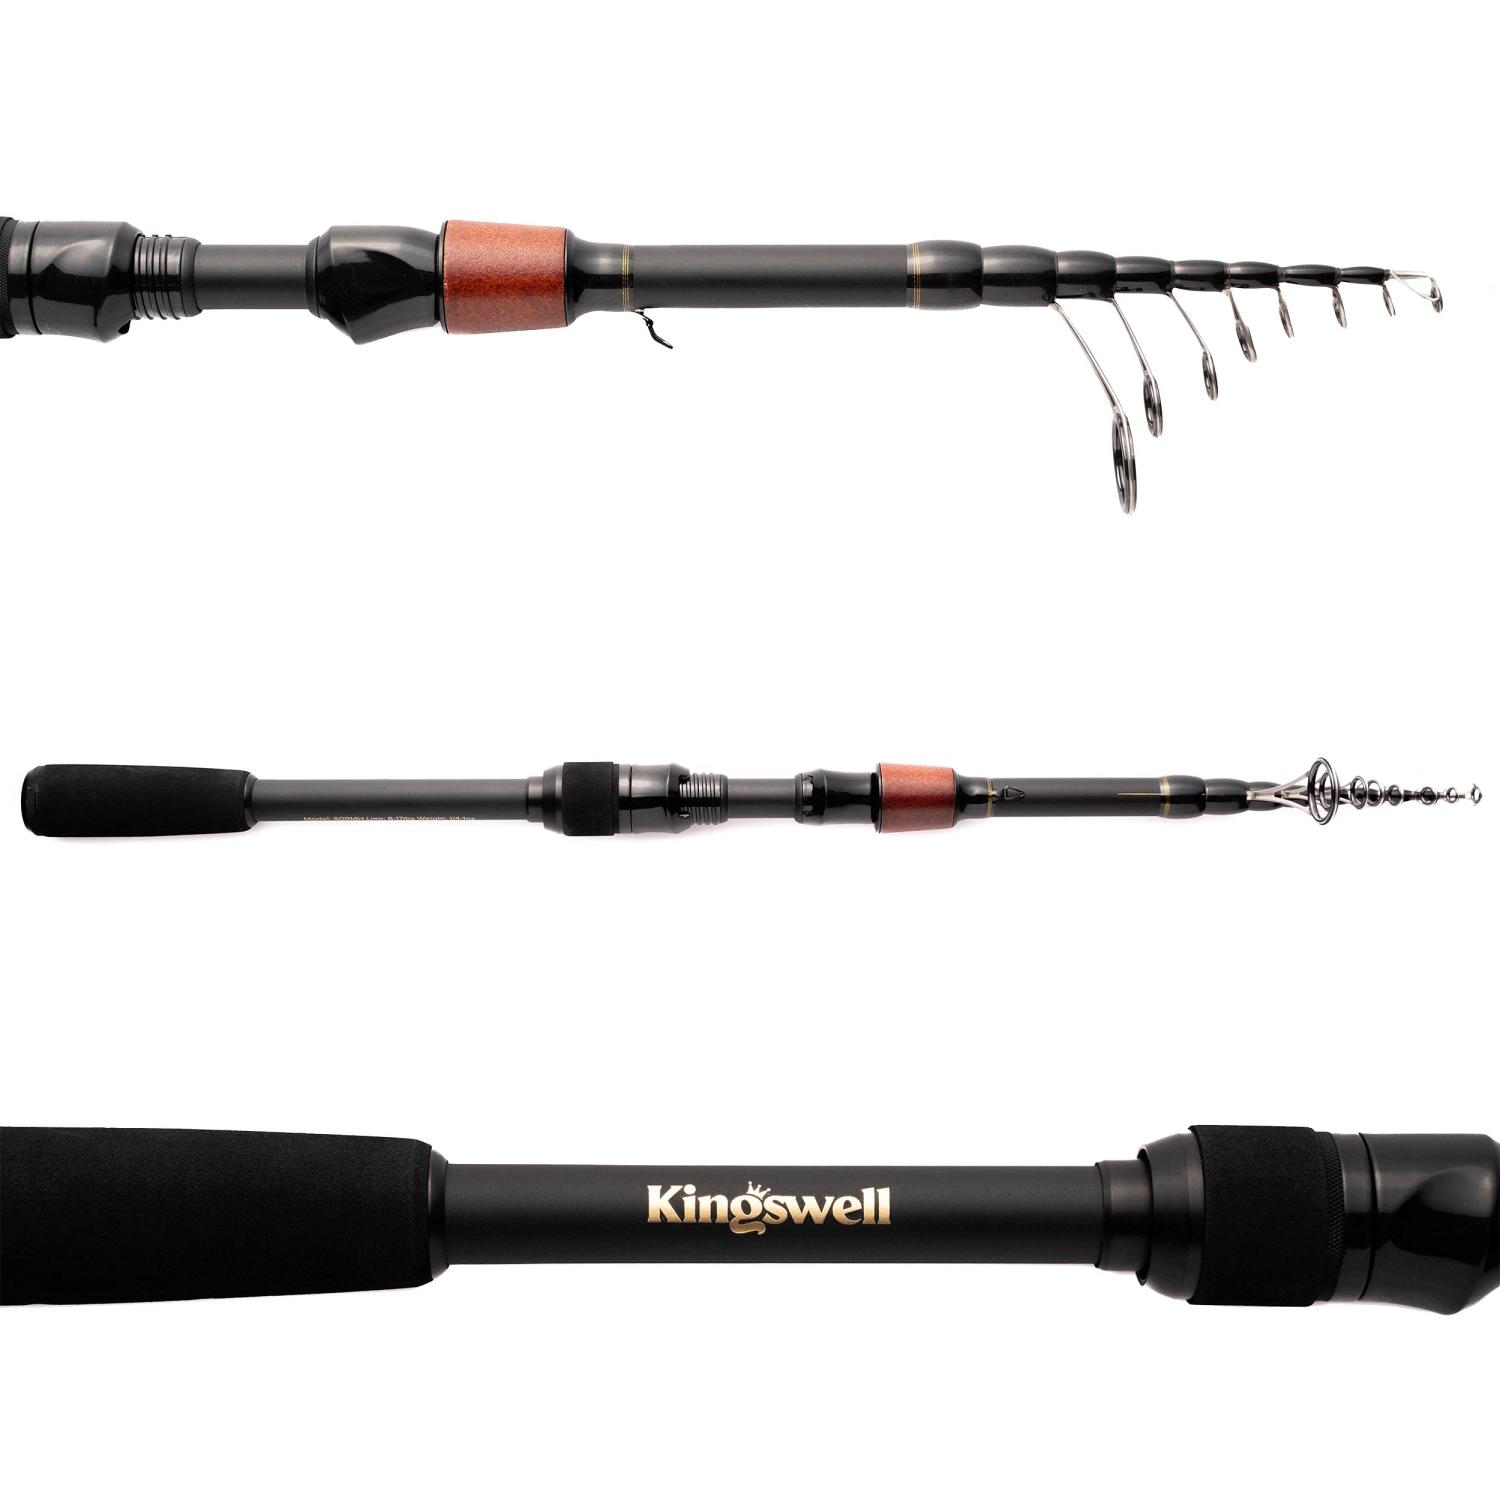  KINGSWELL Telescopic Fishing Rod And Reel Combo, Premium  Graphite Carbon Collapsible Fishing Pole